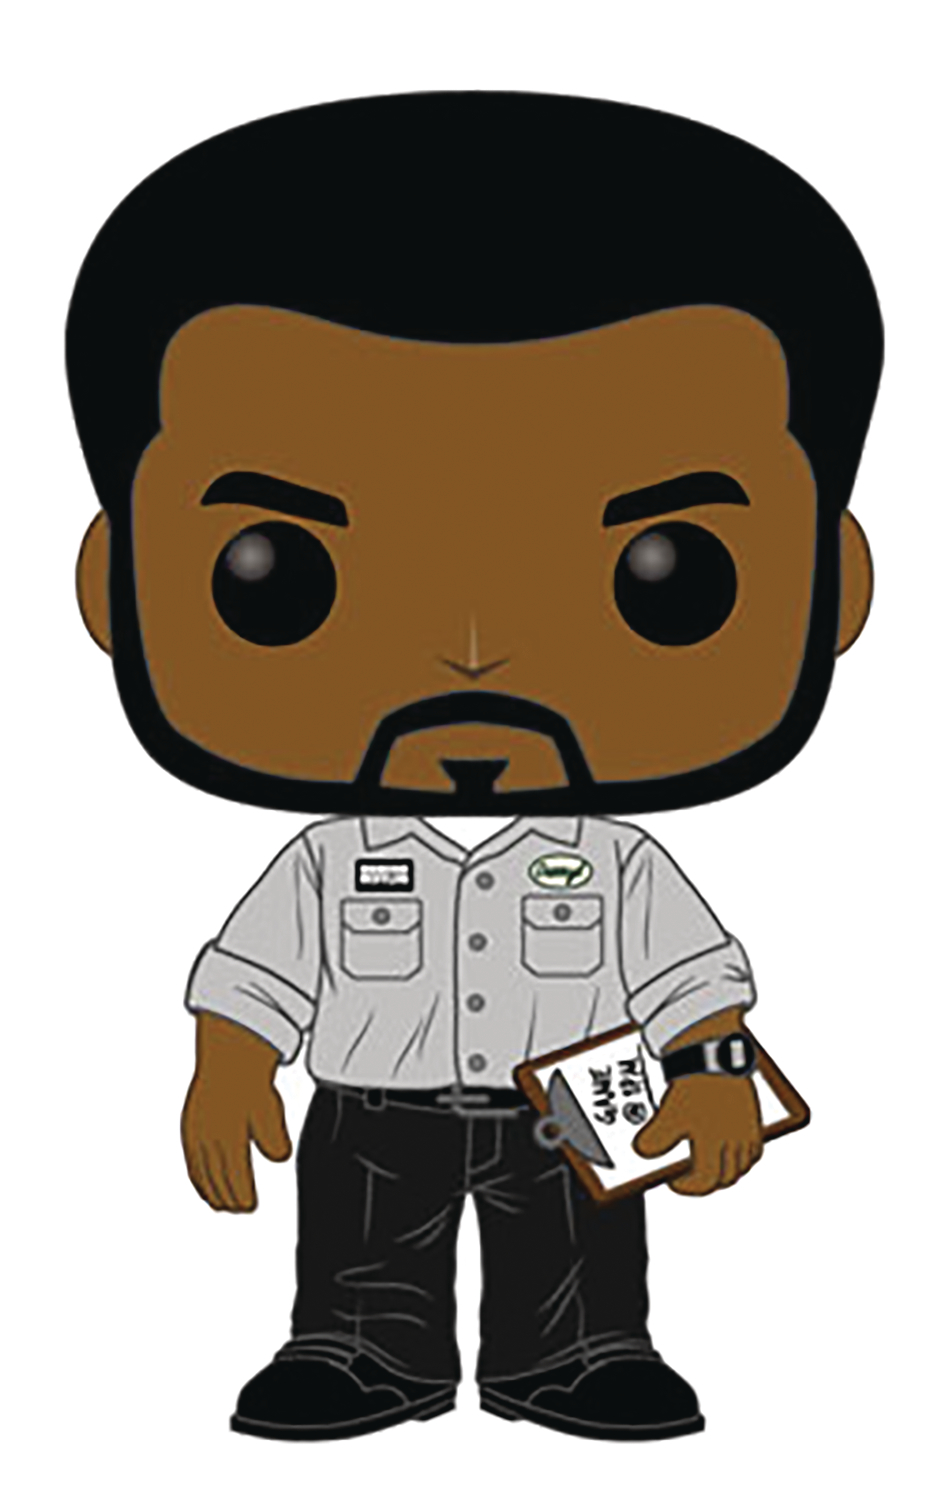 Details about   The Office Funko Minis 3" Vinyl Figure Darryl Philbin #28 *Mint in Sealed Box*